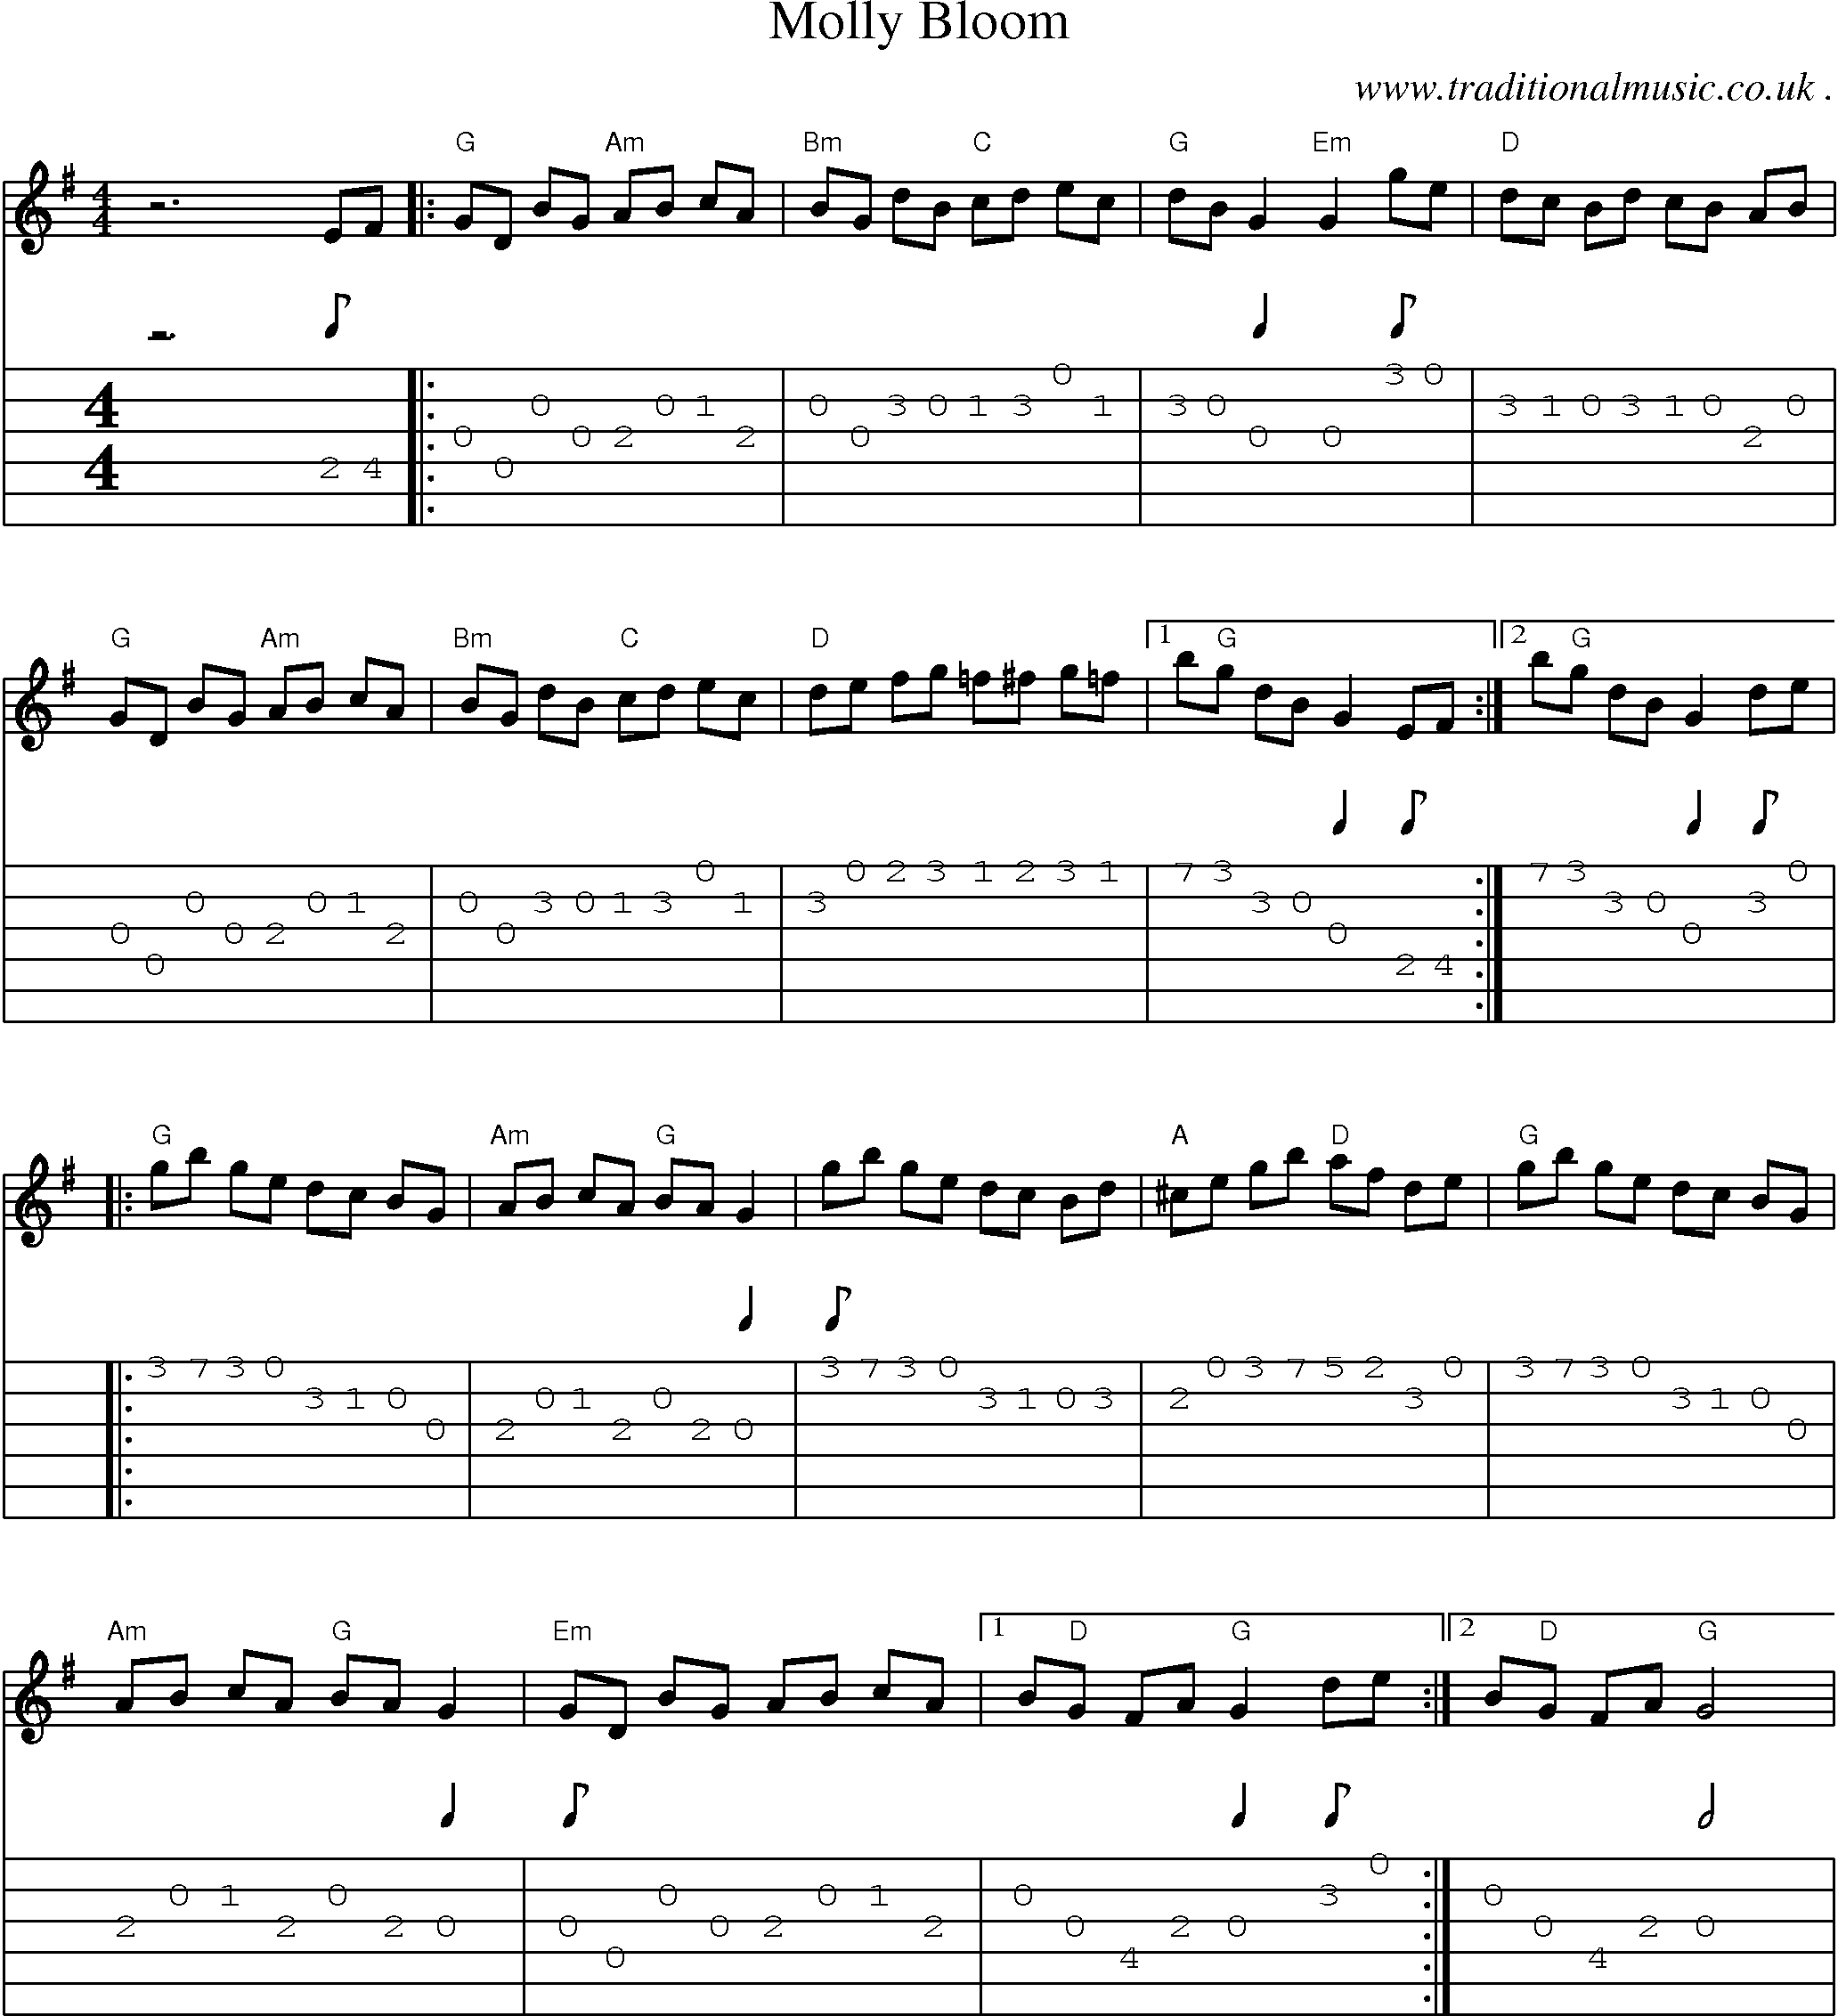 Music Score and Guitar Tabs for Molly Bloom